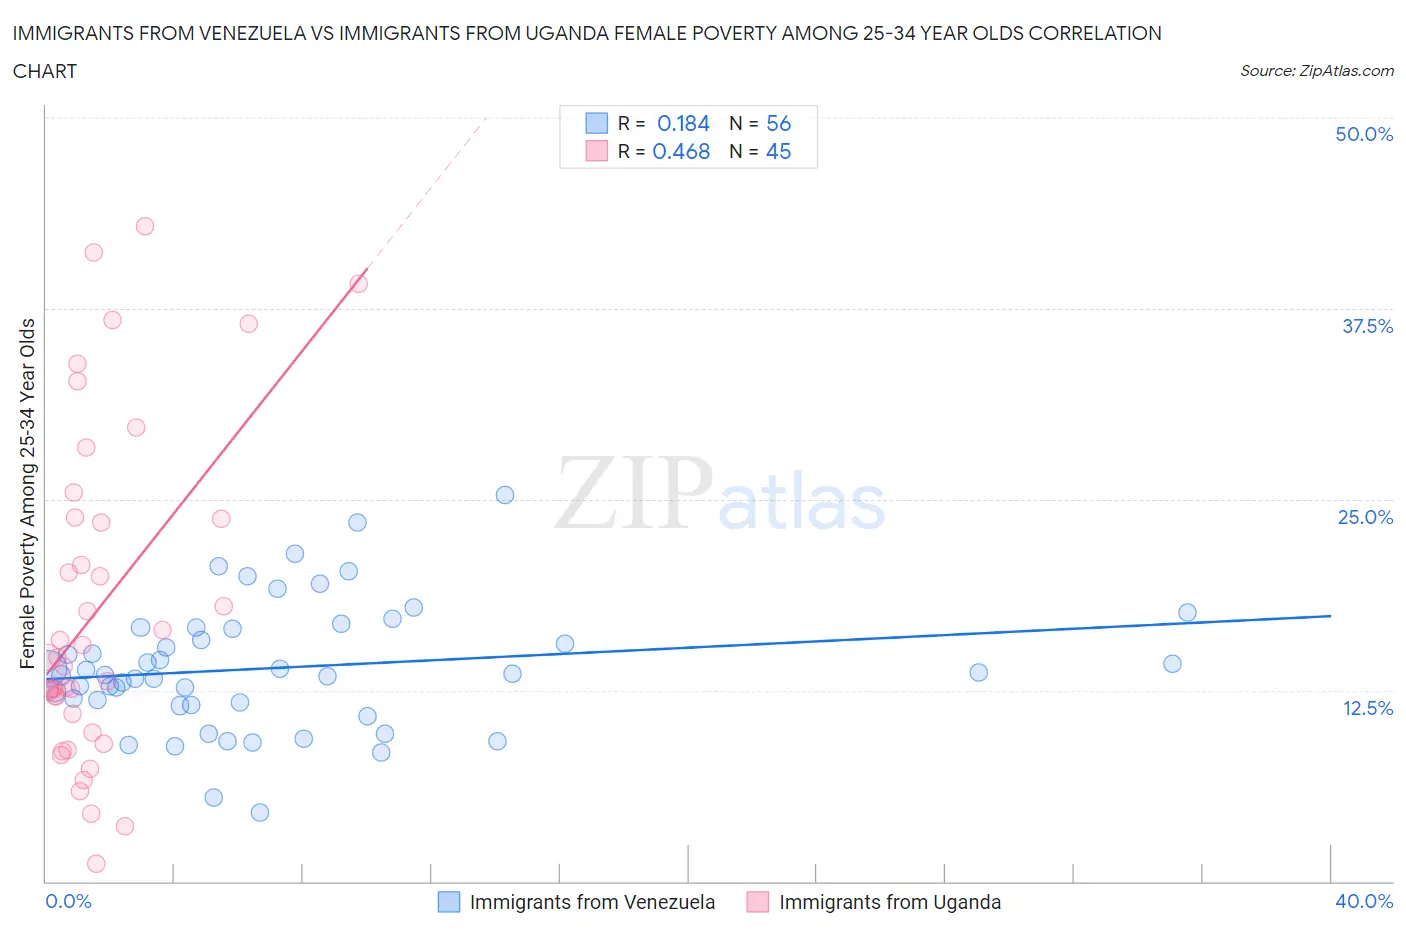 Immigrants from Venezuela vs Immigrants from Uganda Female Poverty Among 25-34 Year Olds